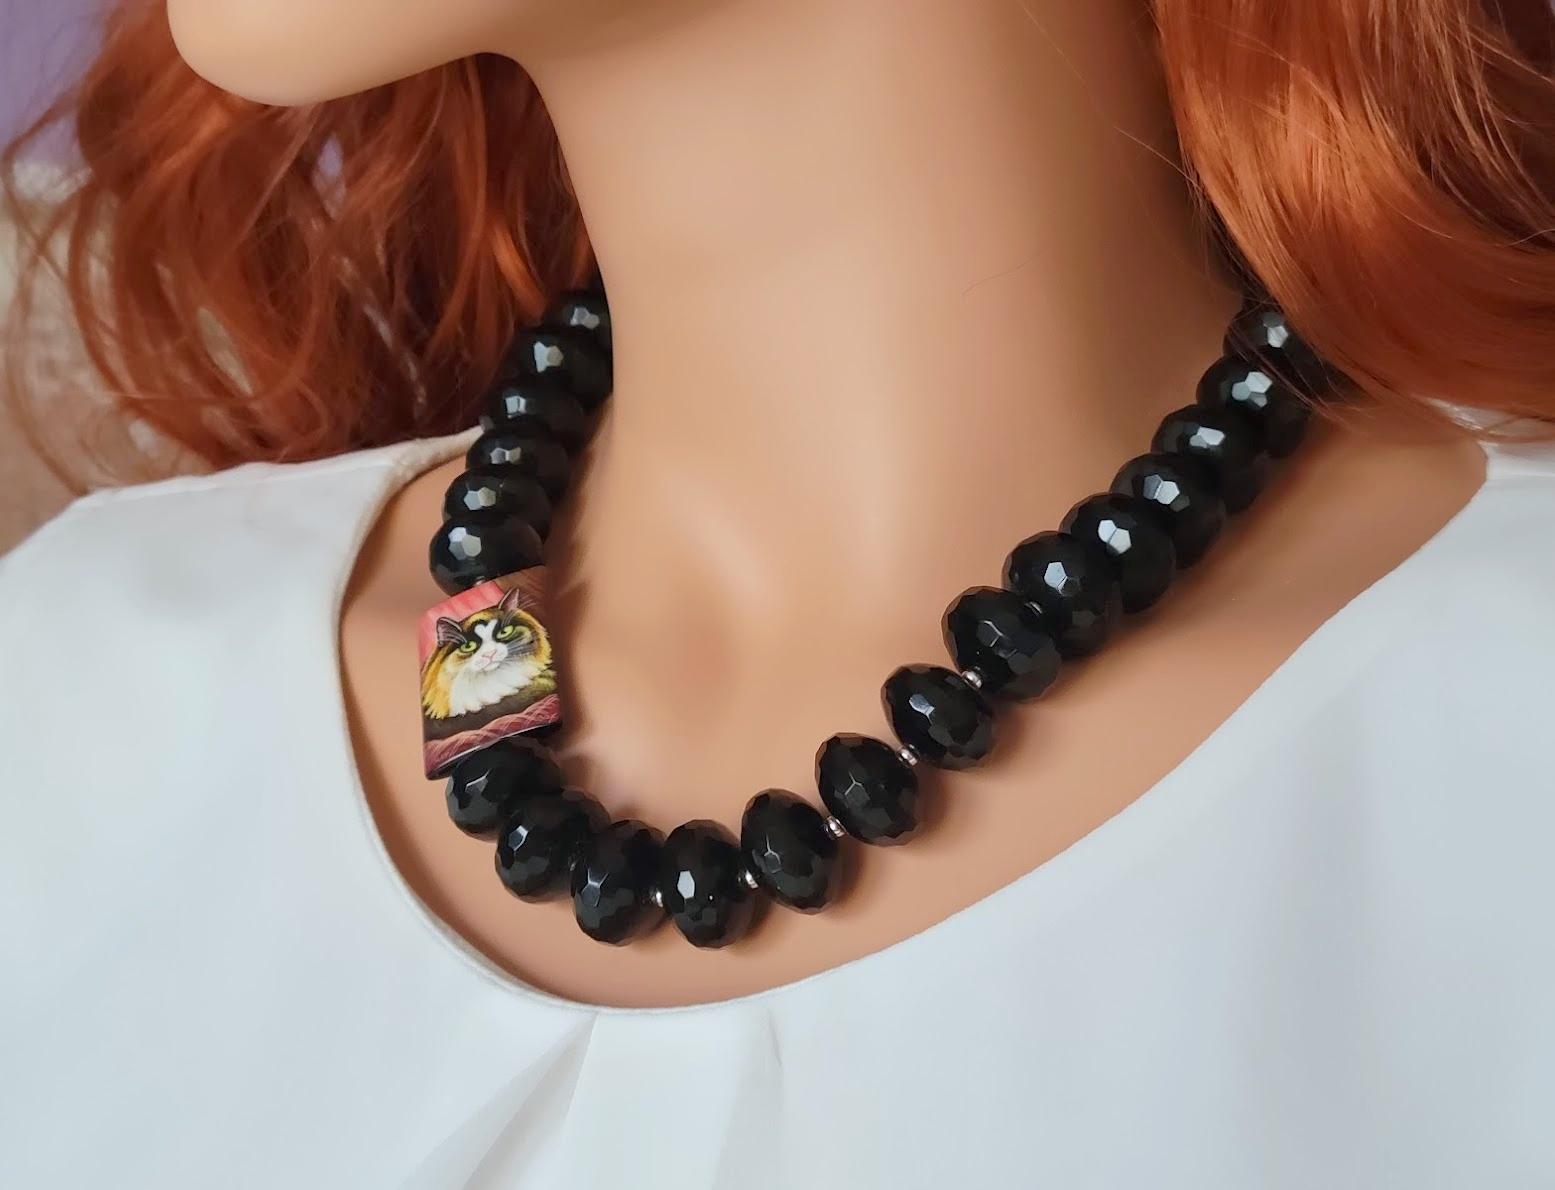 Women's Black Onyx Necklace With Hand Painted Bead On Black Rectangular Agate For Sale